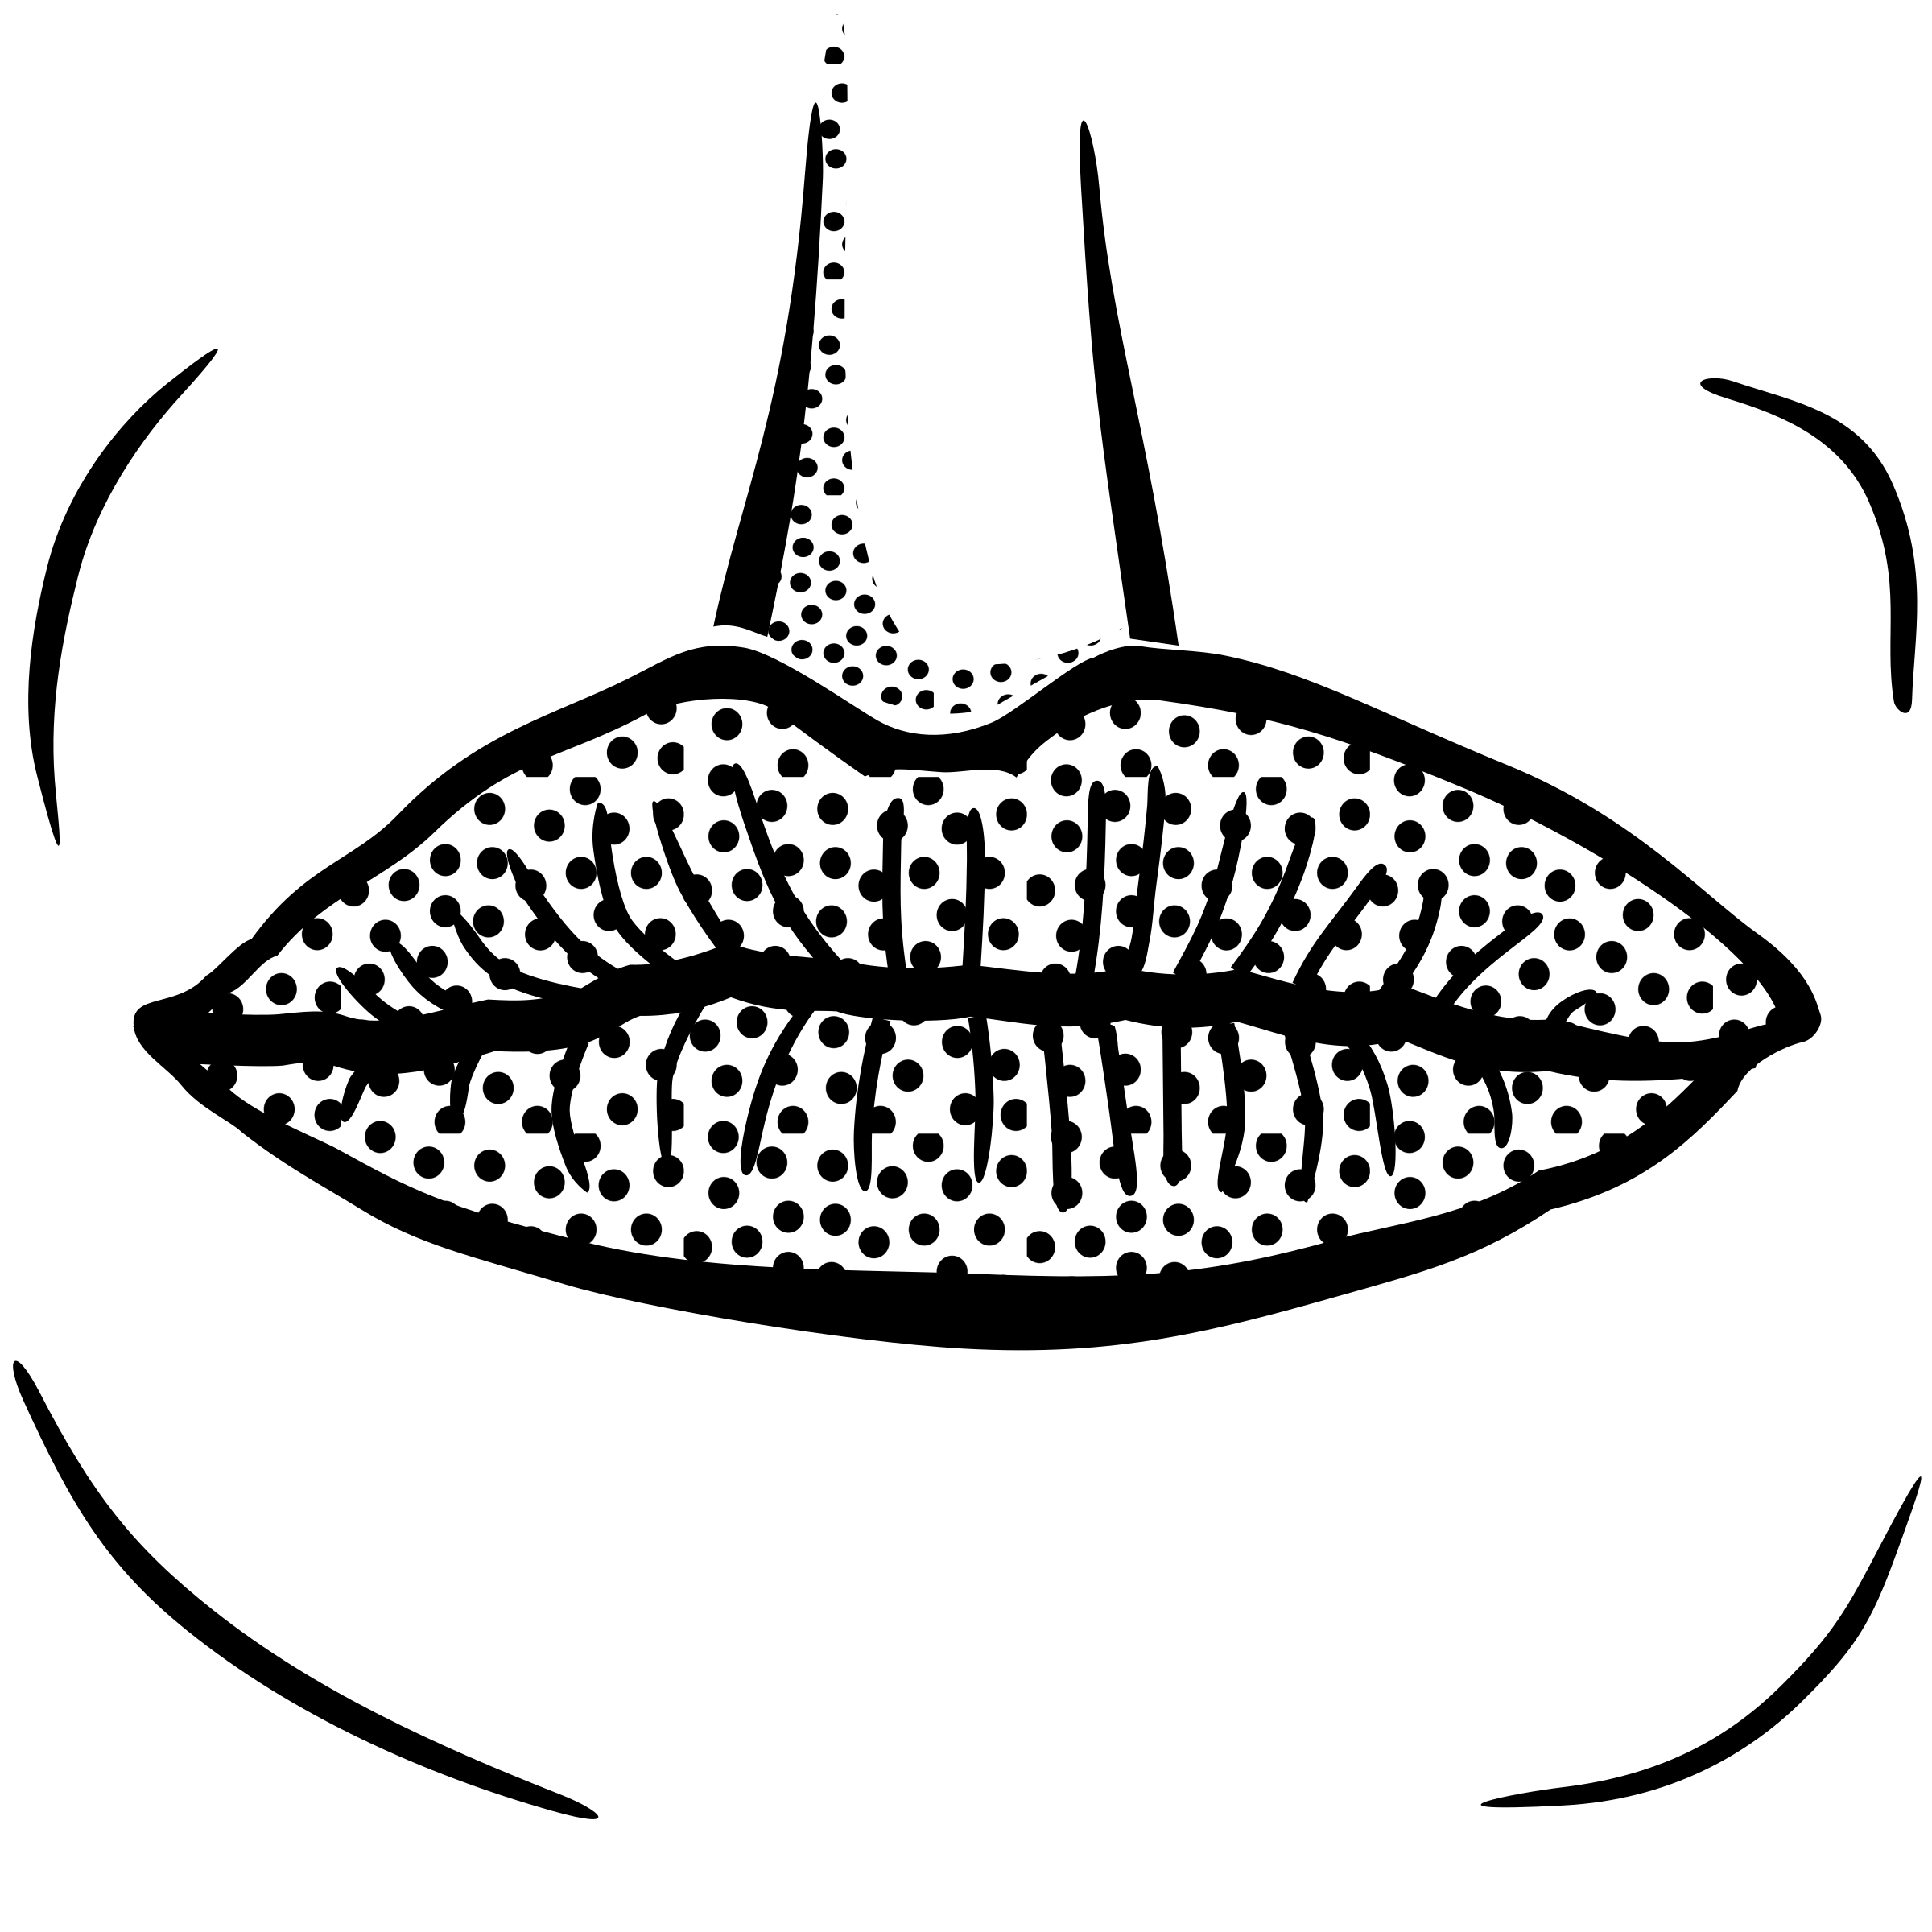 clipart mouth black and white